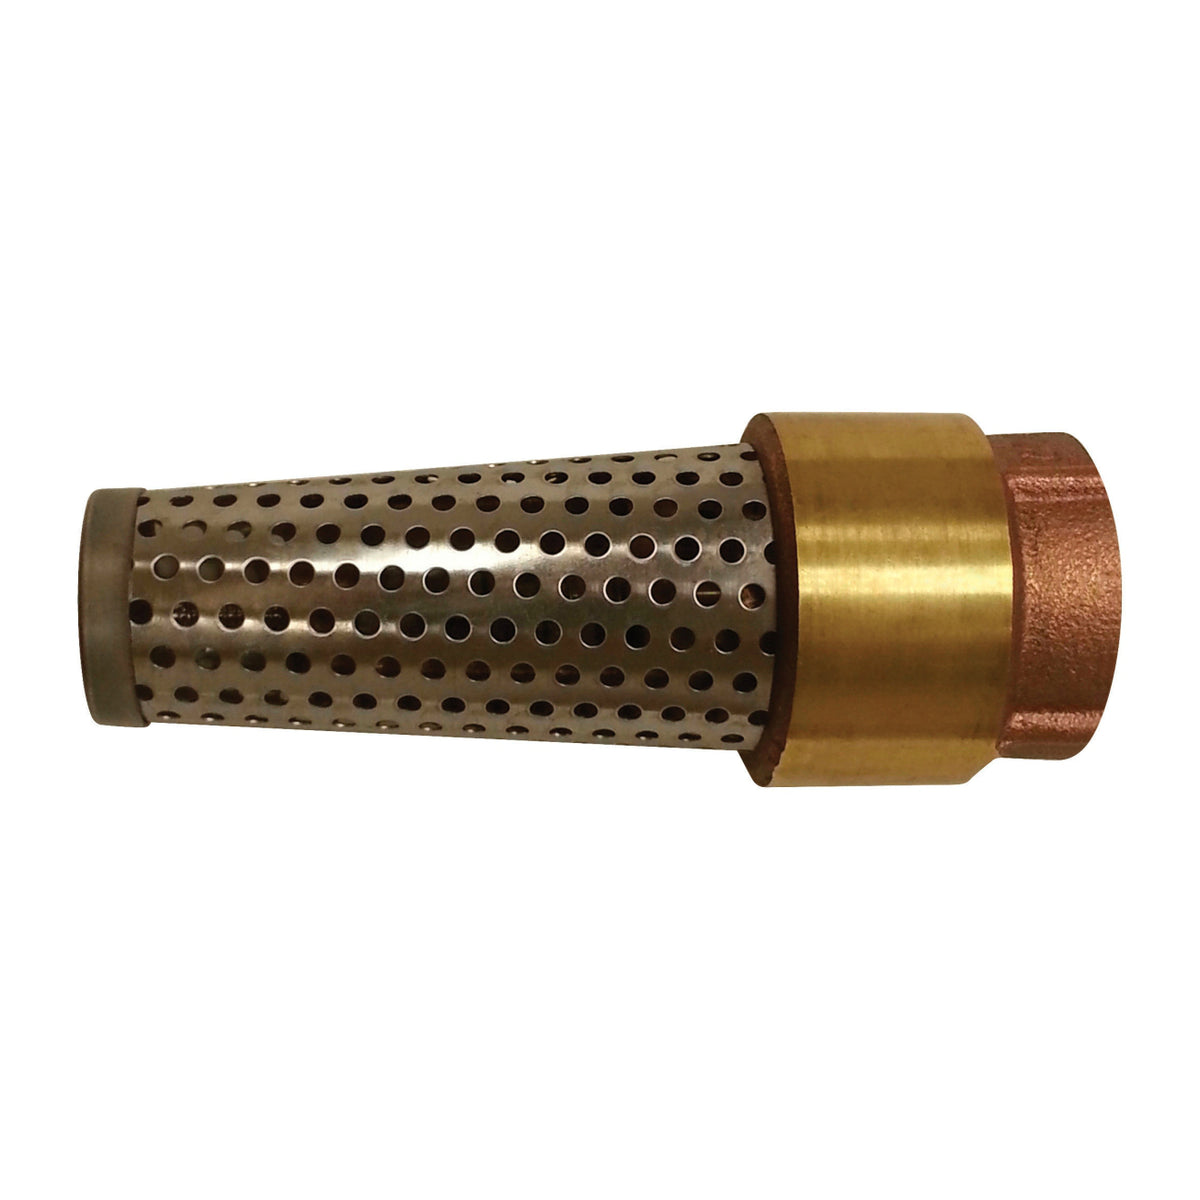 Buy campbell foot valve - Online store for rough plumbing supplies, foot  in USA, on sale, low price, discount deals, coupon code